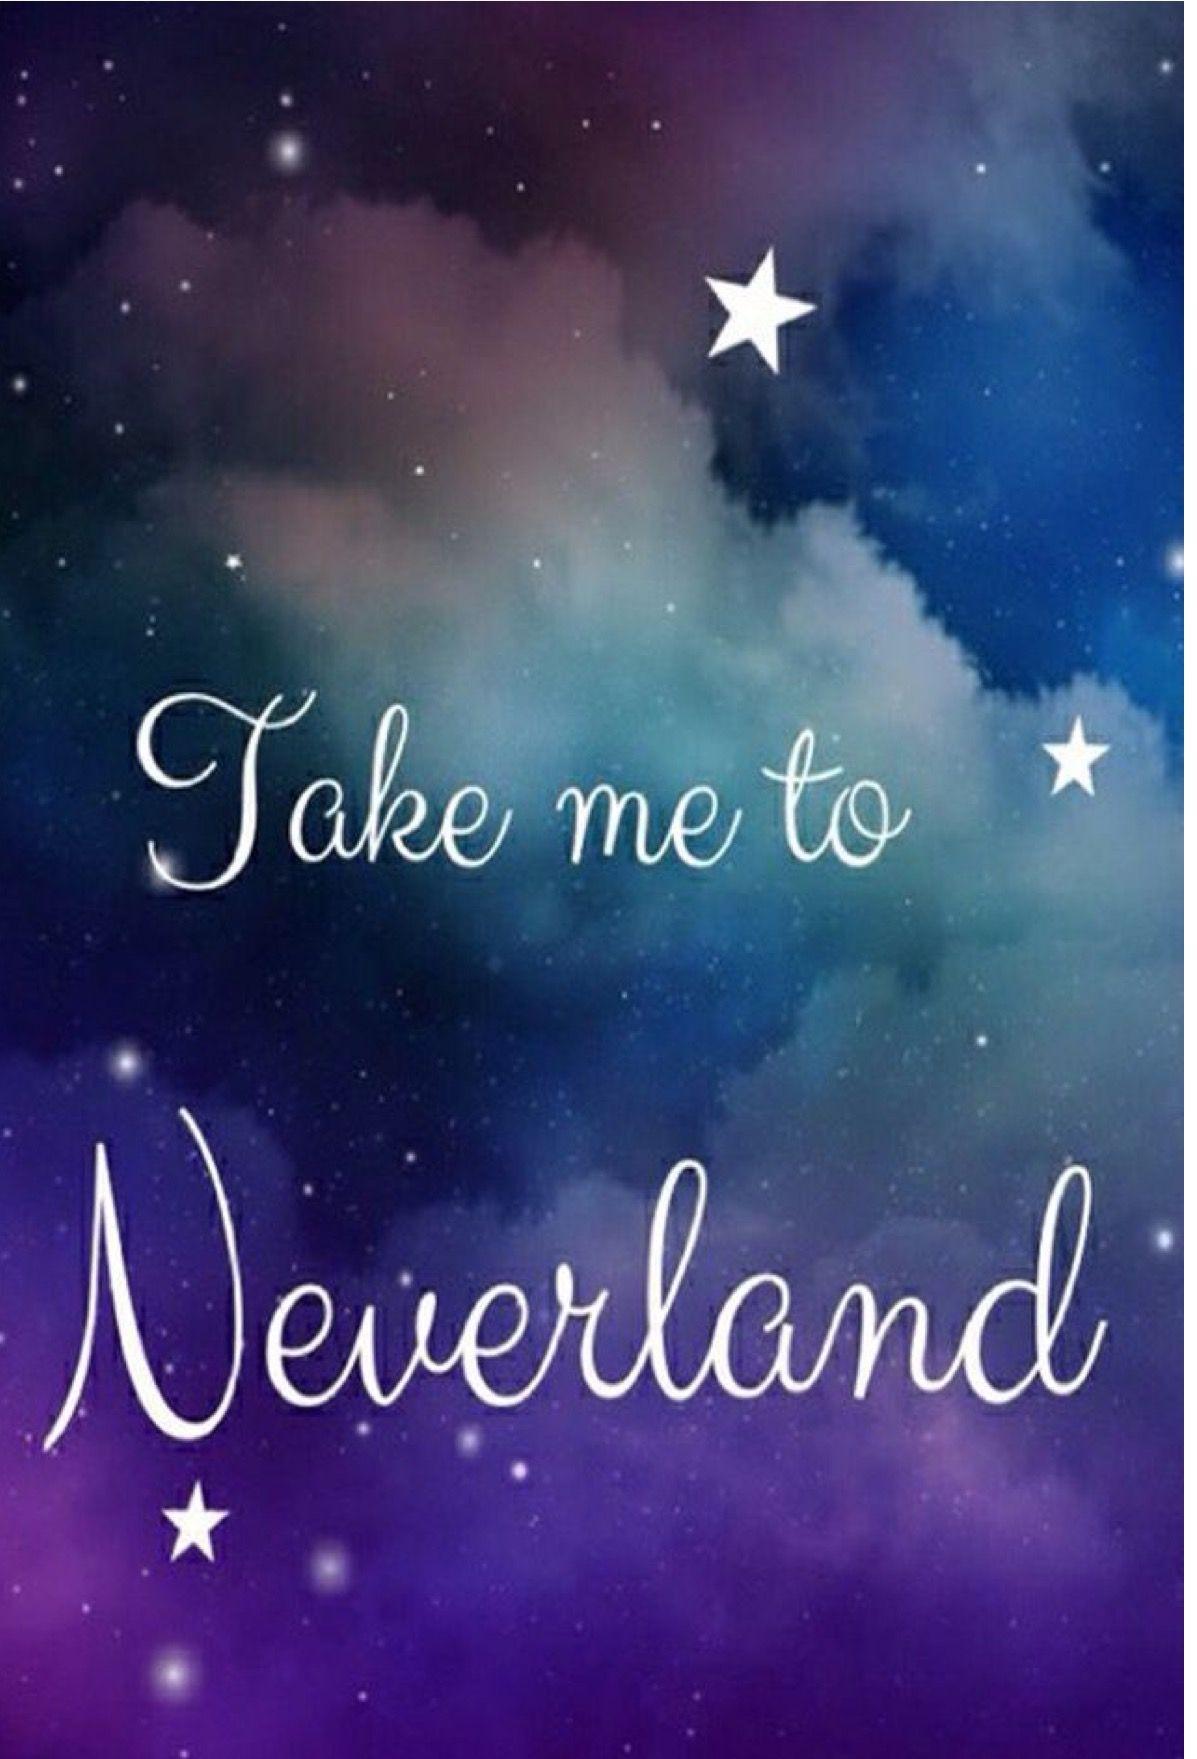 peter pan quotes about neverland